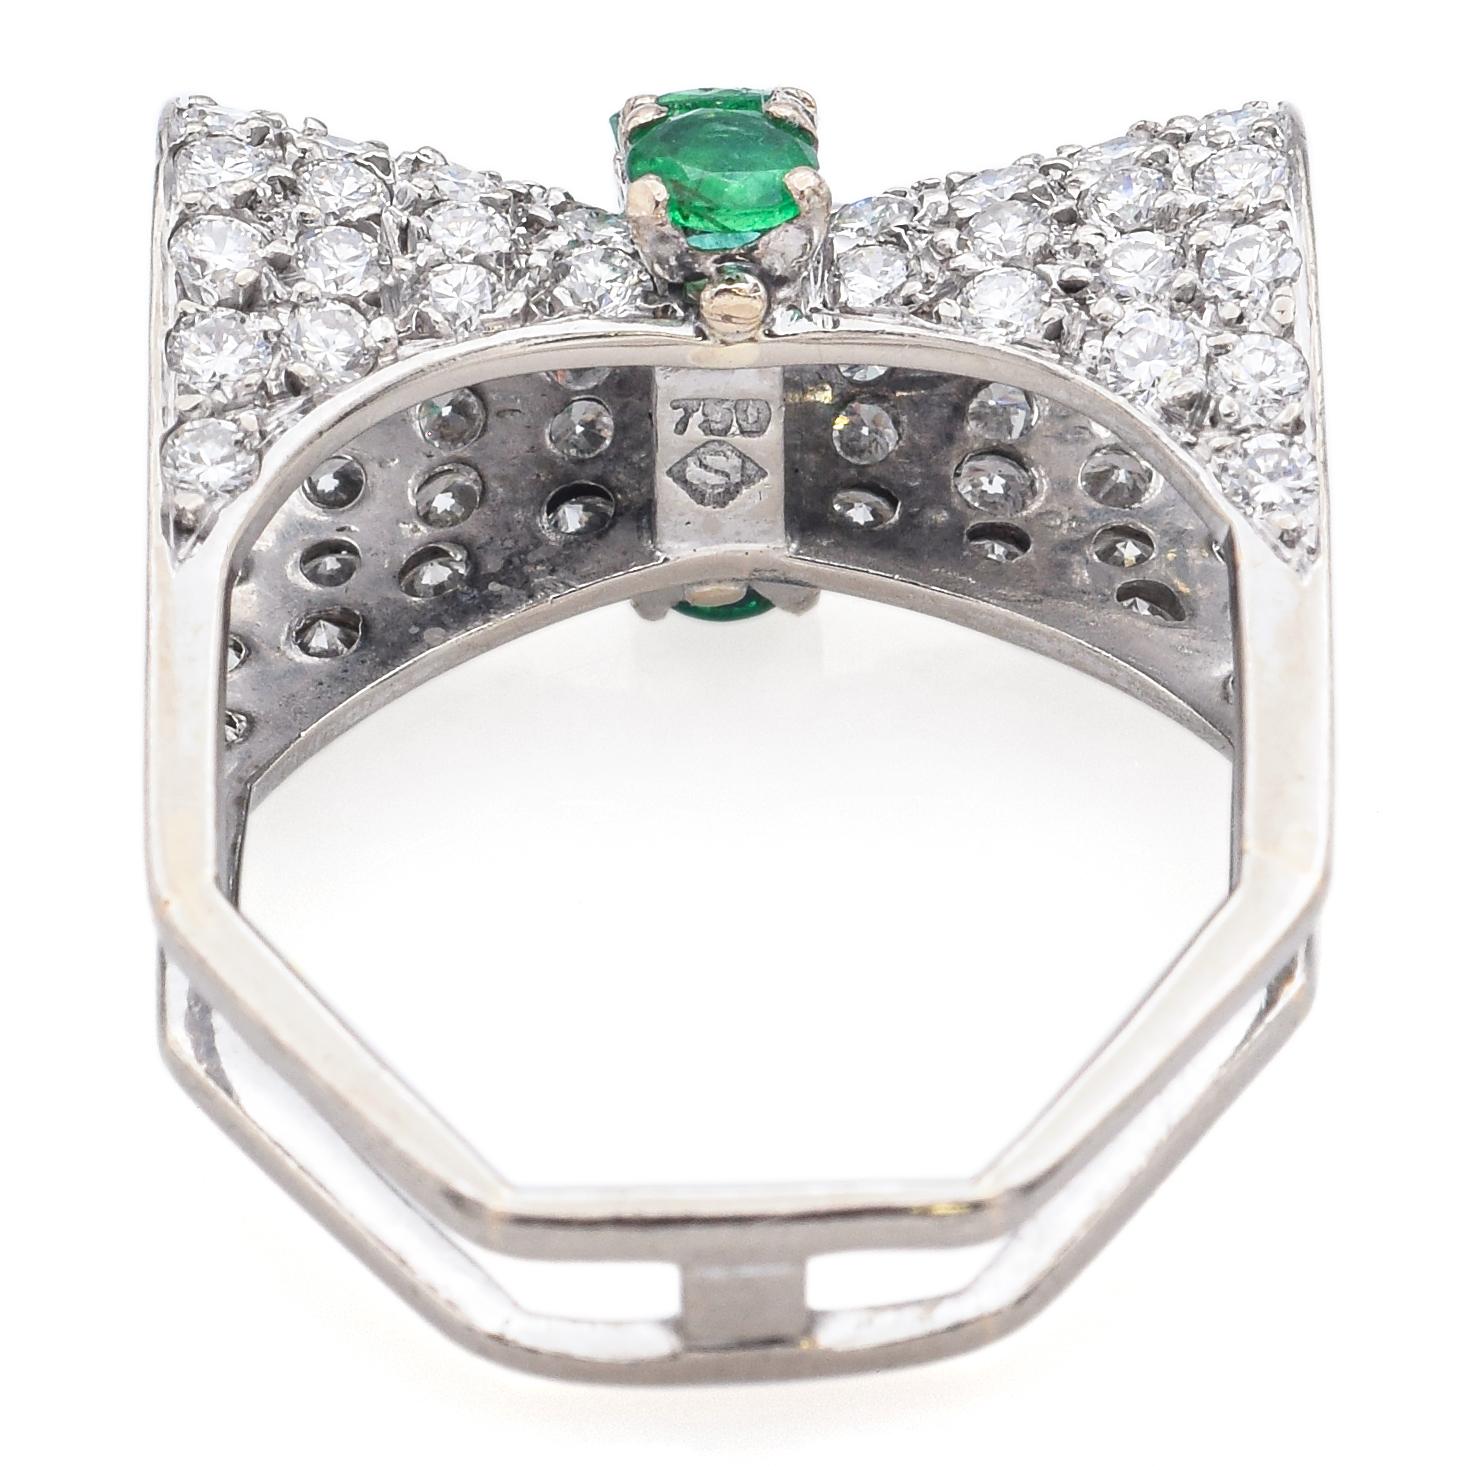 H. Stern 18K White Gold Emerald & 1.60 TCW Diamond Bow Ring with Box Size 5.5 1